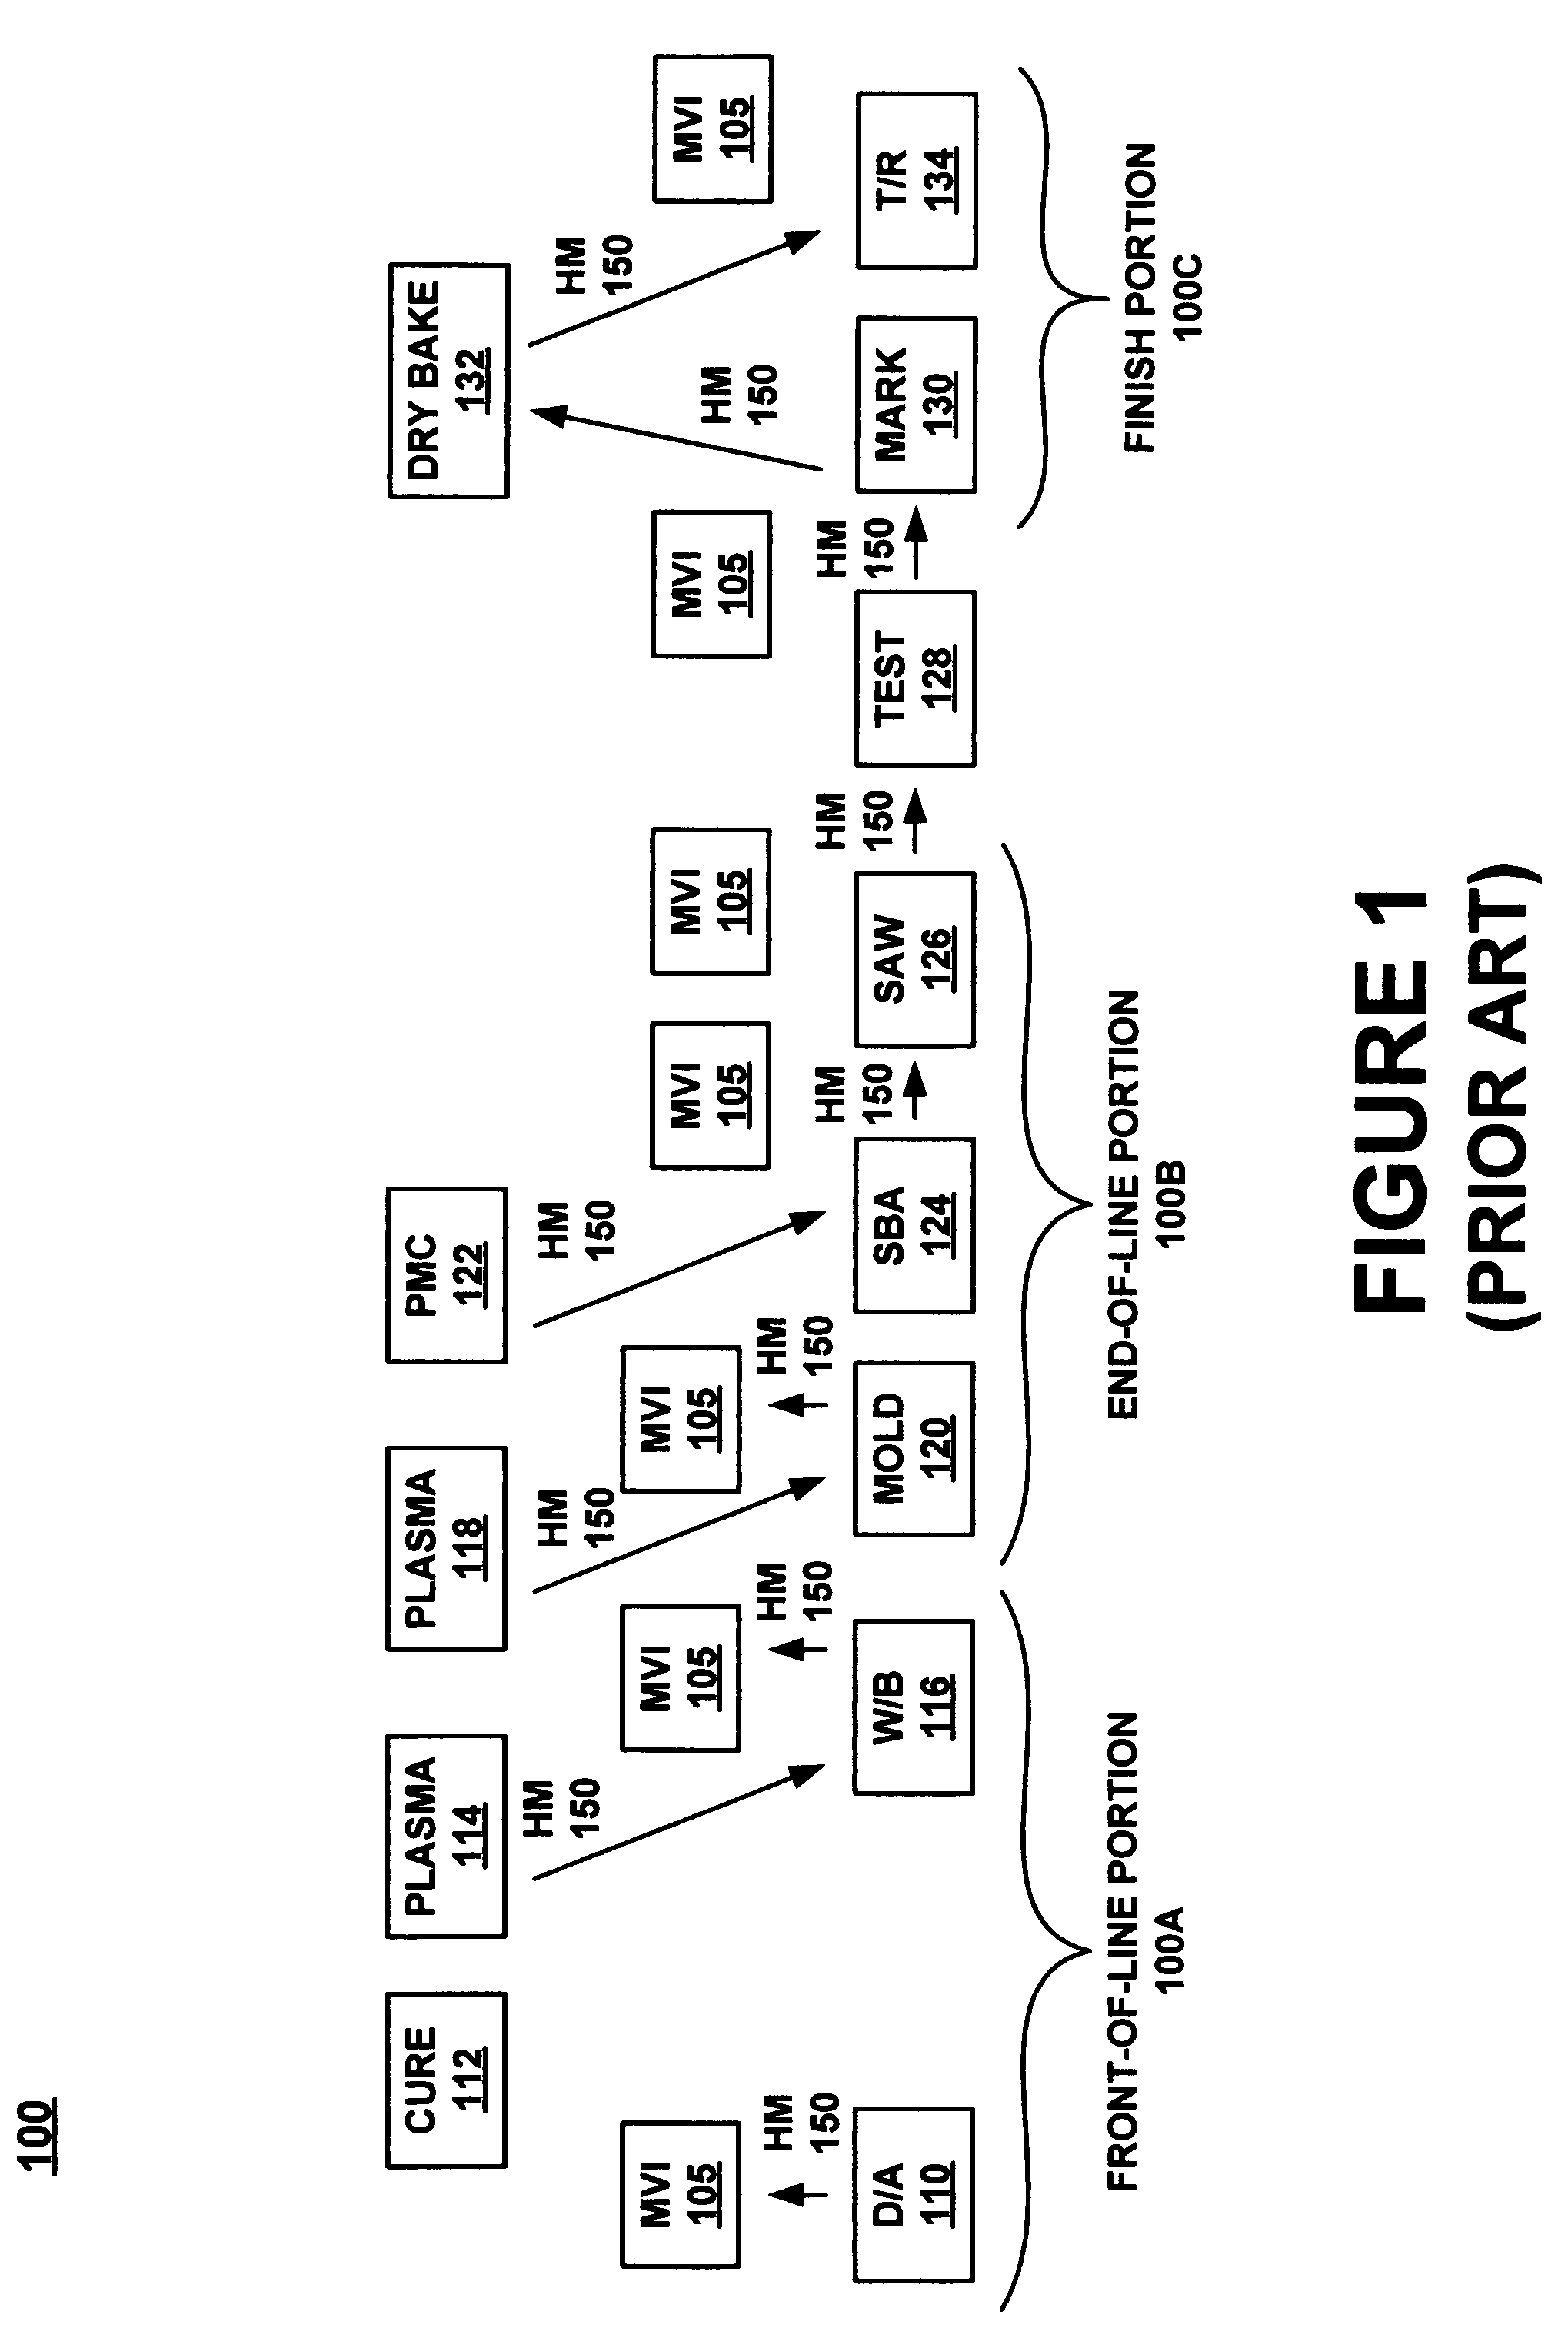 Method of performing back-end manufacturing of an integrated circuit device